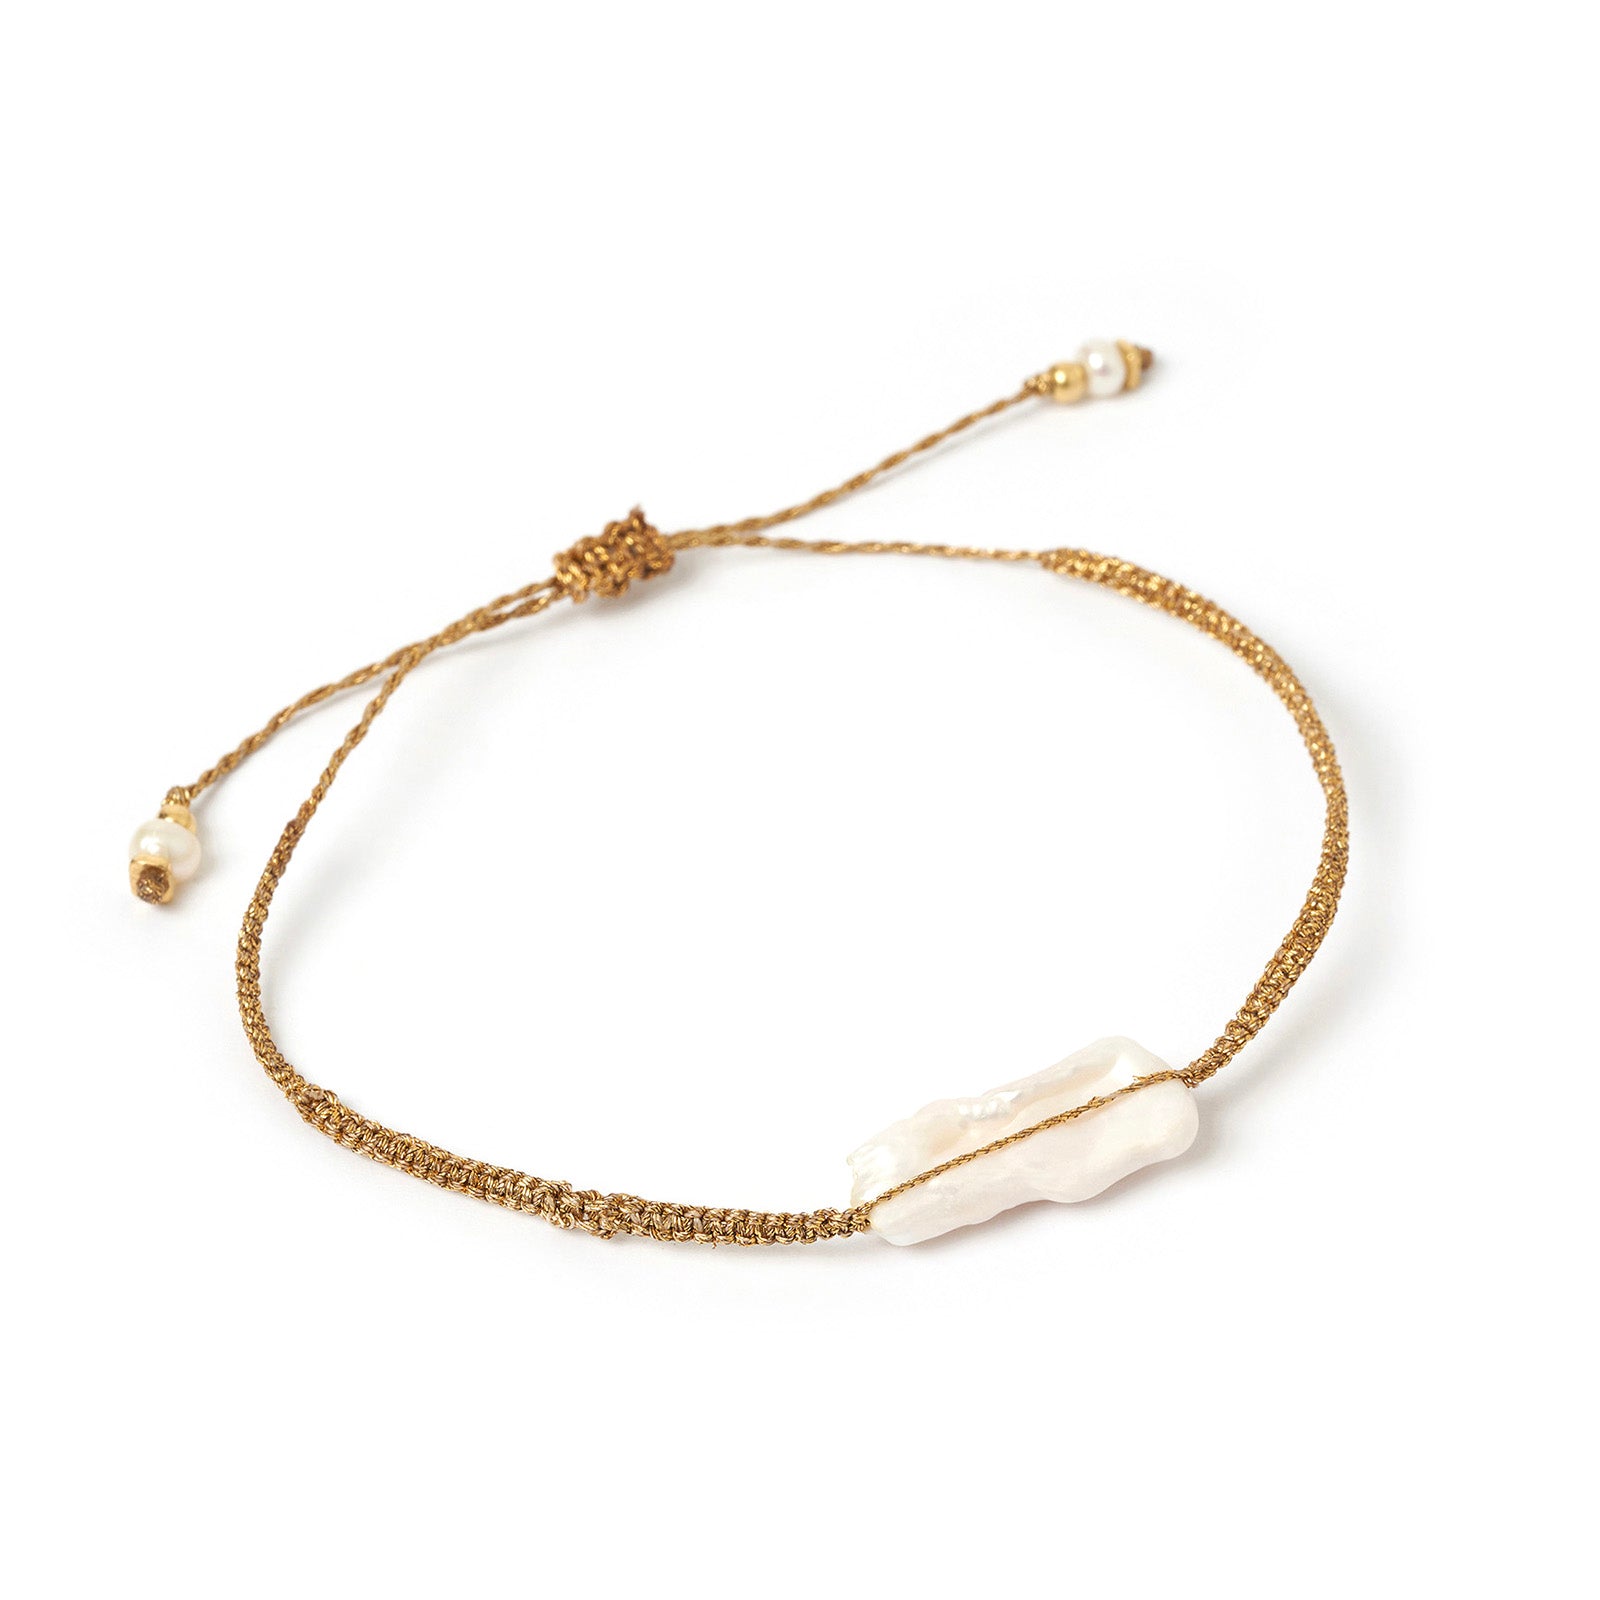 Tulum Pearl and Gold Bracelet